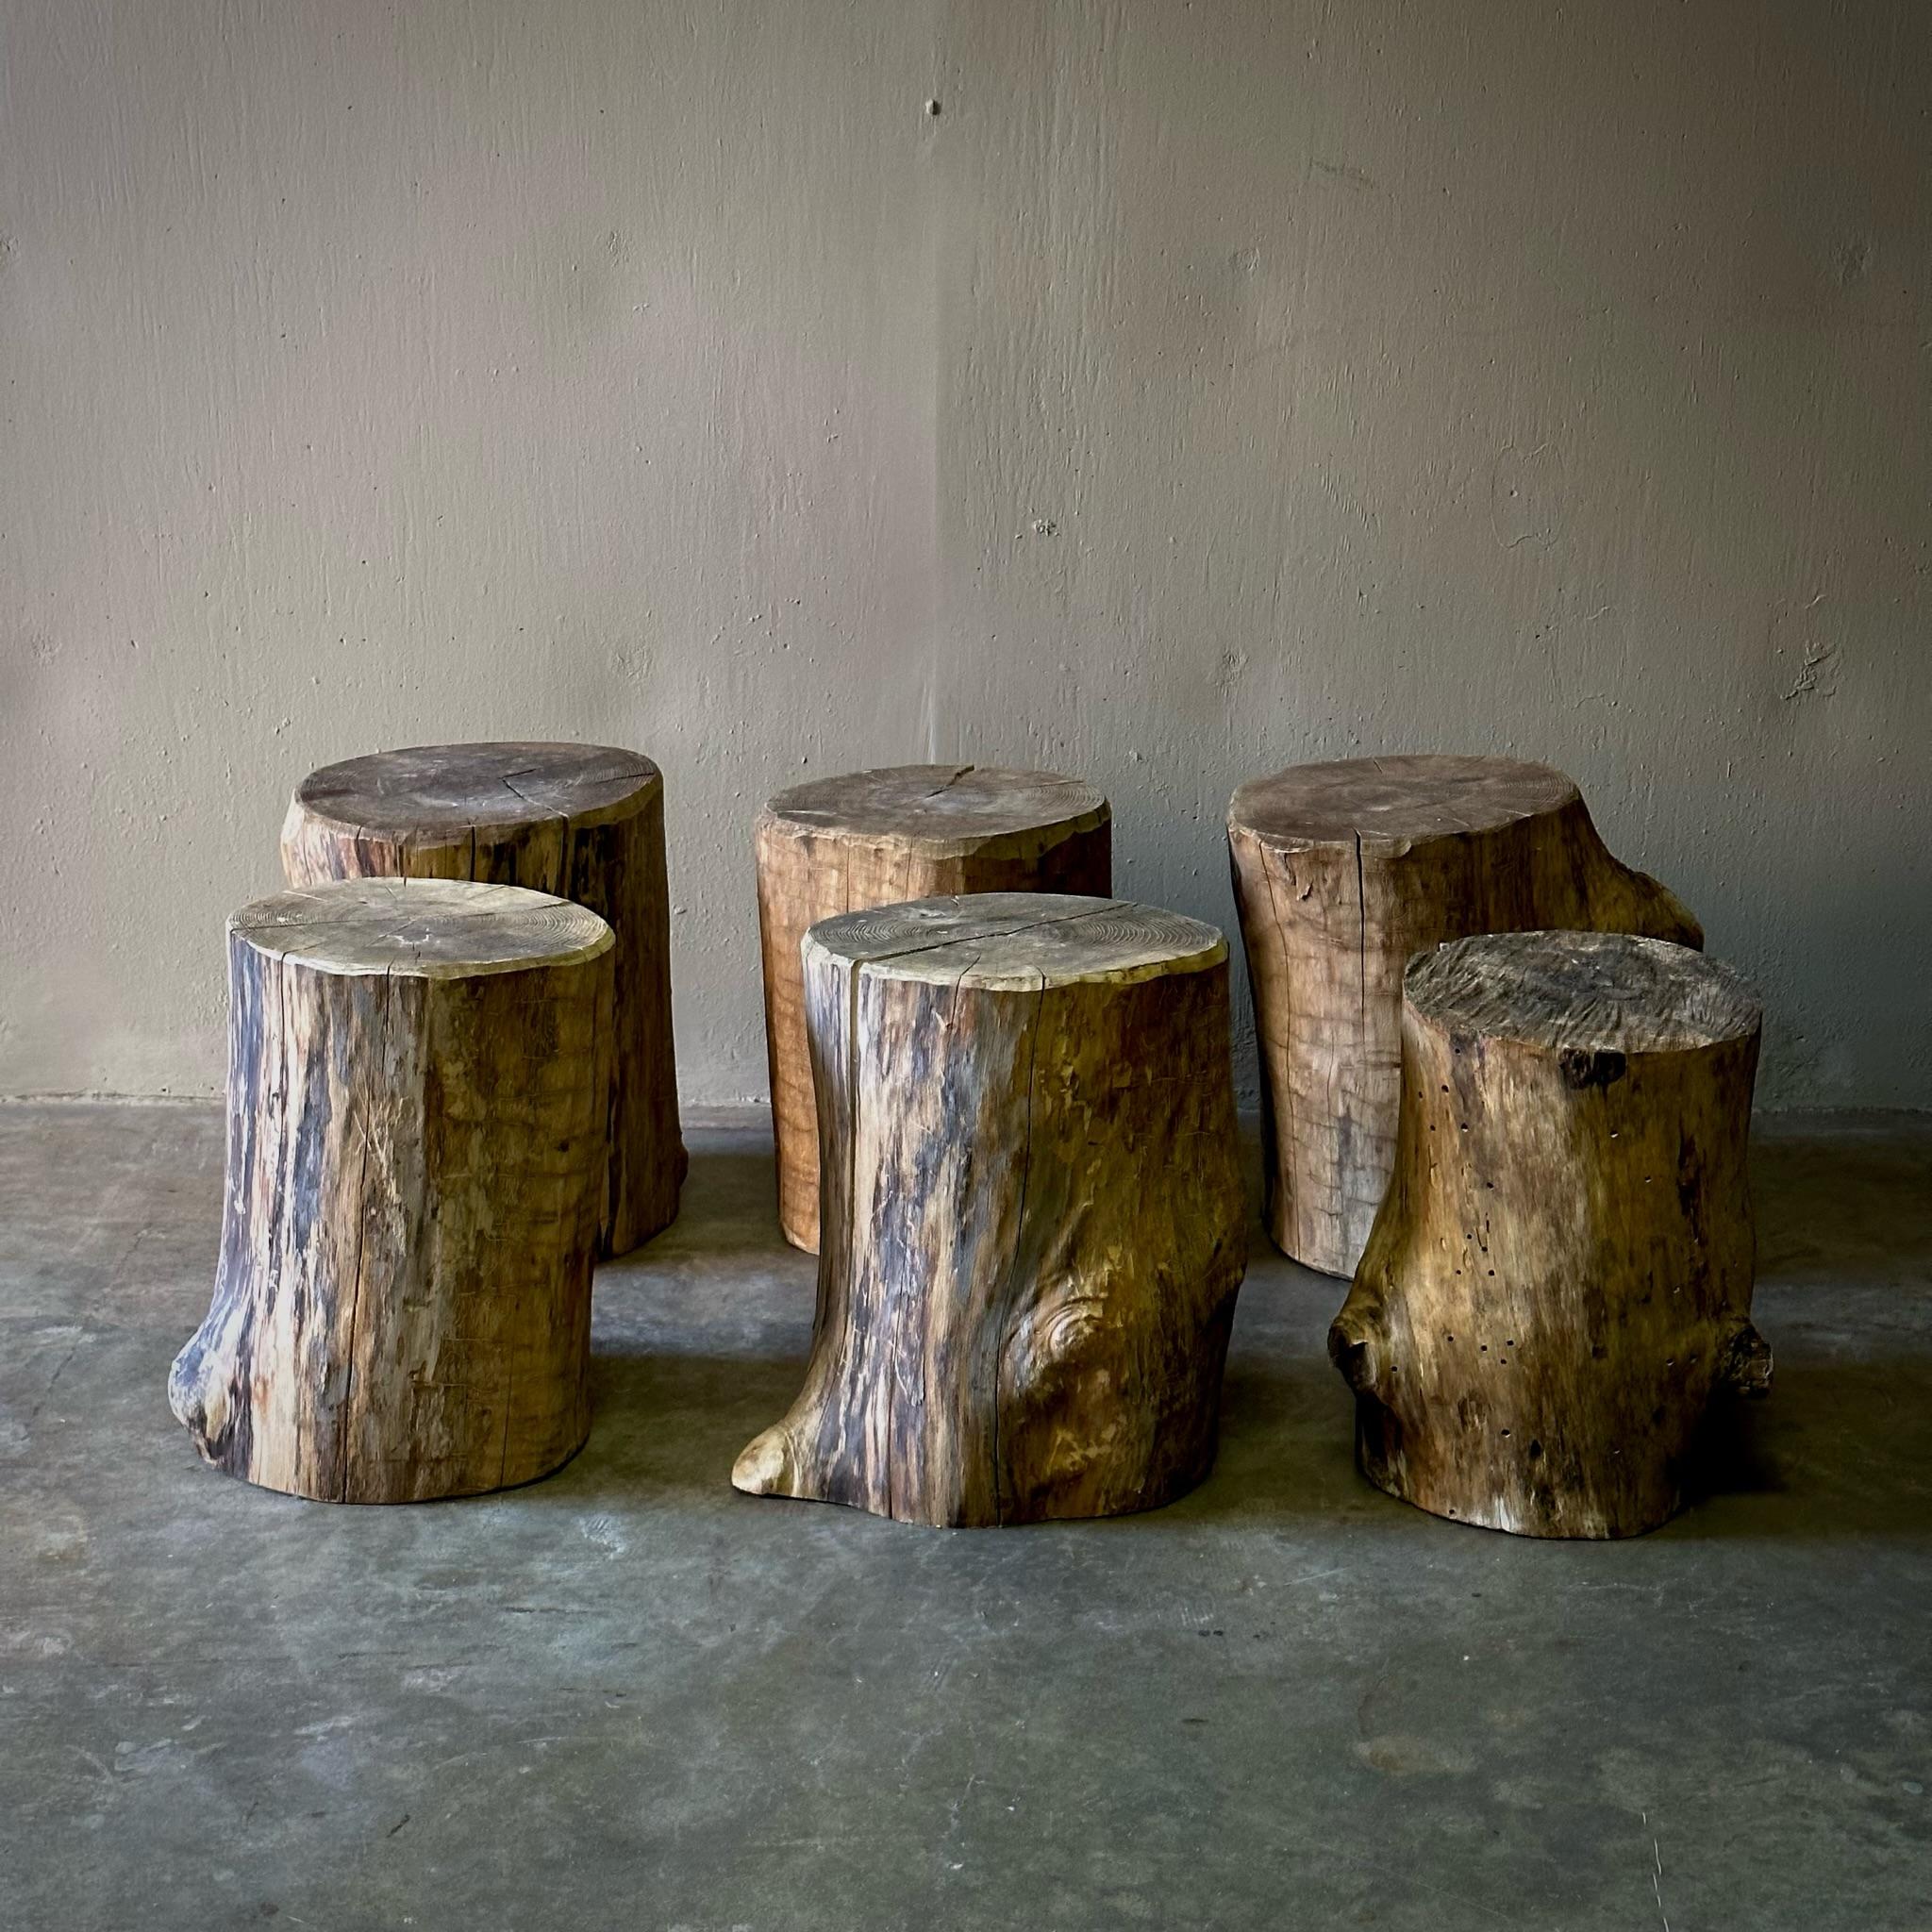 Six oak wood stump stools or side tables. A chic way of bringing the beauty of nature indoors. Rustic and elemental. 

Netherlands, circa 1960.

Dimensions: 14.2W x 14.2D x 17.3H.